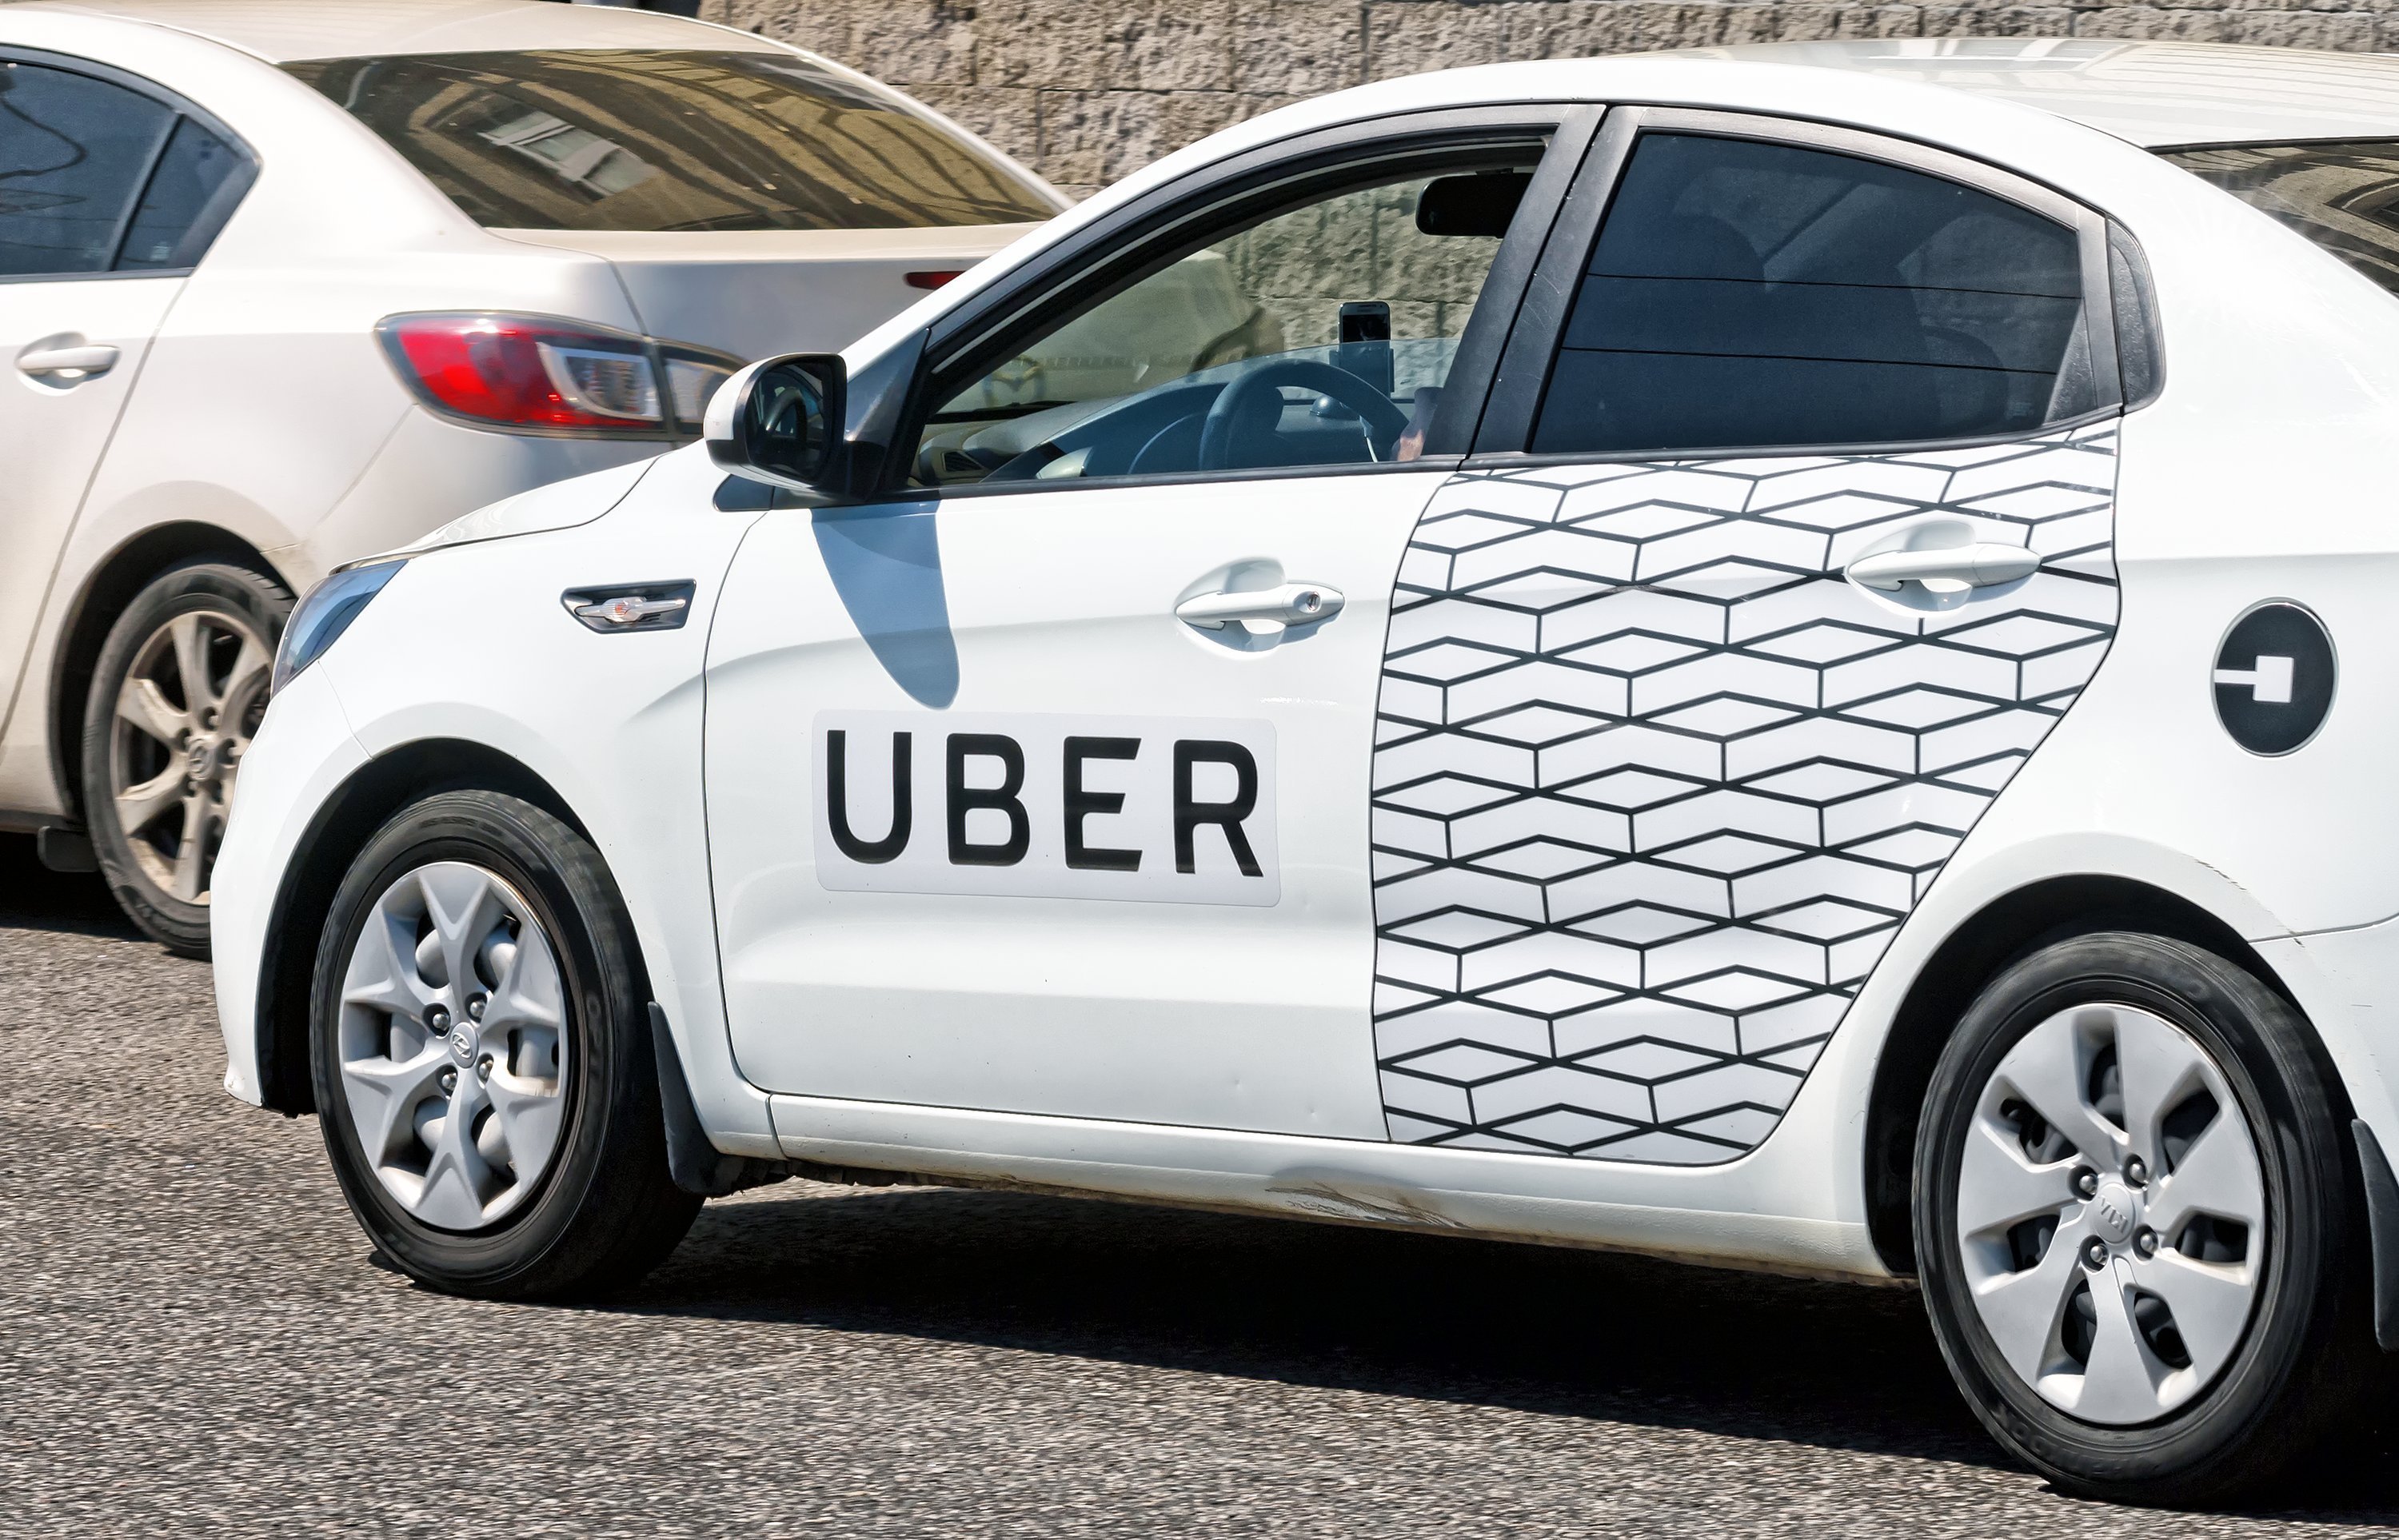 White car with Uber decals. | Source: Shutterstock